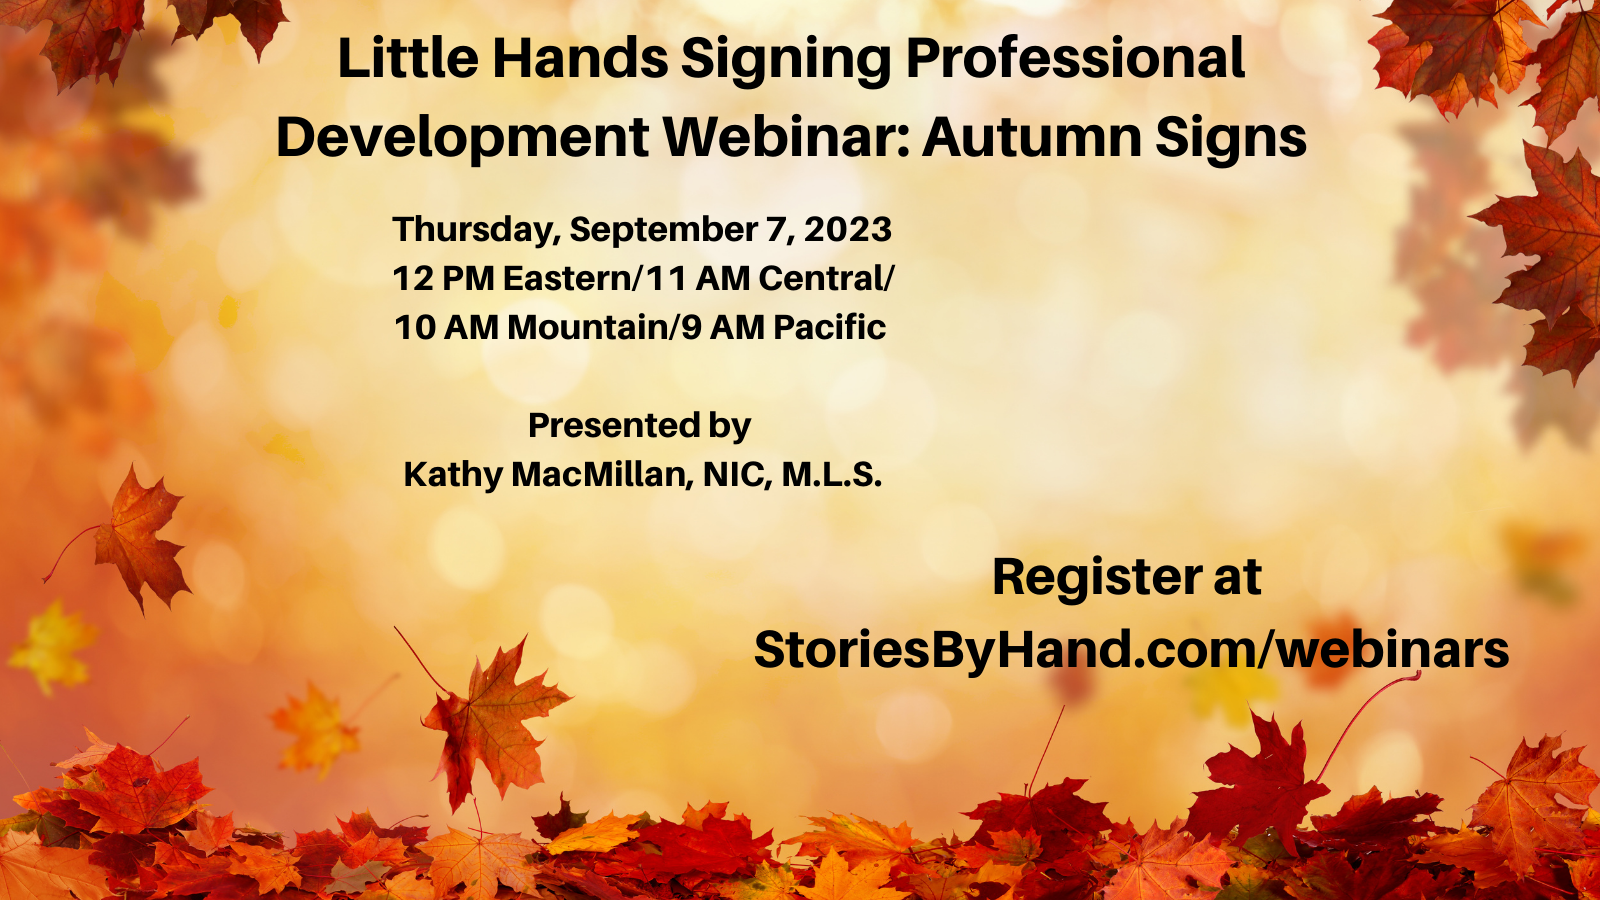 Brightly colored autumn leaves drift down around the text: Little Hands Signing Professional Development Webinar: Autumn Signs. Thursday, September 7, 2023. 12 PM Eastern/11 AM Central/10 AM Mountain/9 AM Pacific. Presented by Kathy MacMillan, NIC, MLS. Register at StoriesByHand.com/webinars